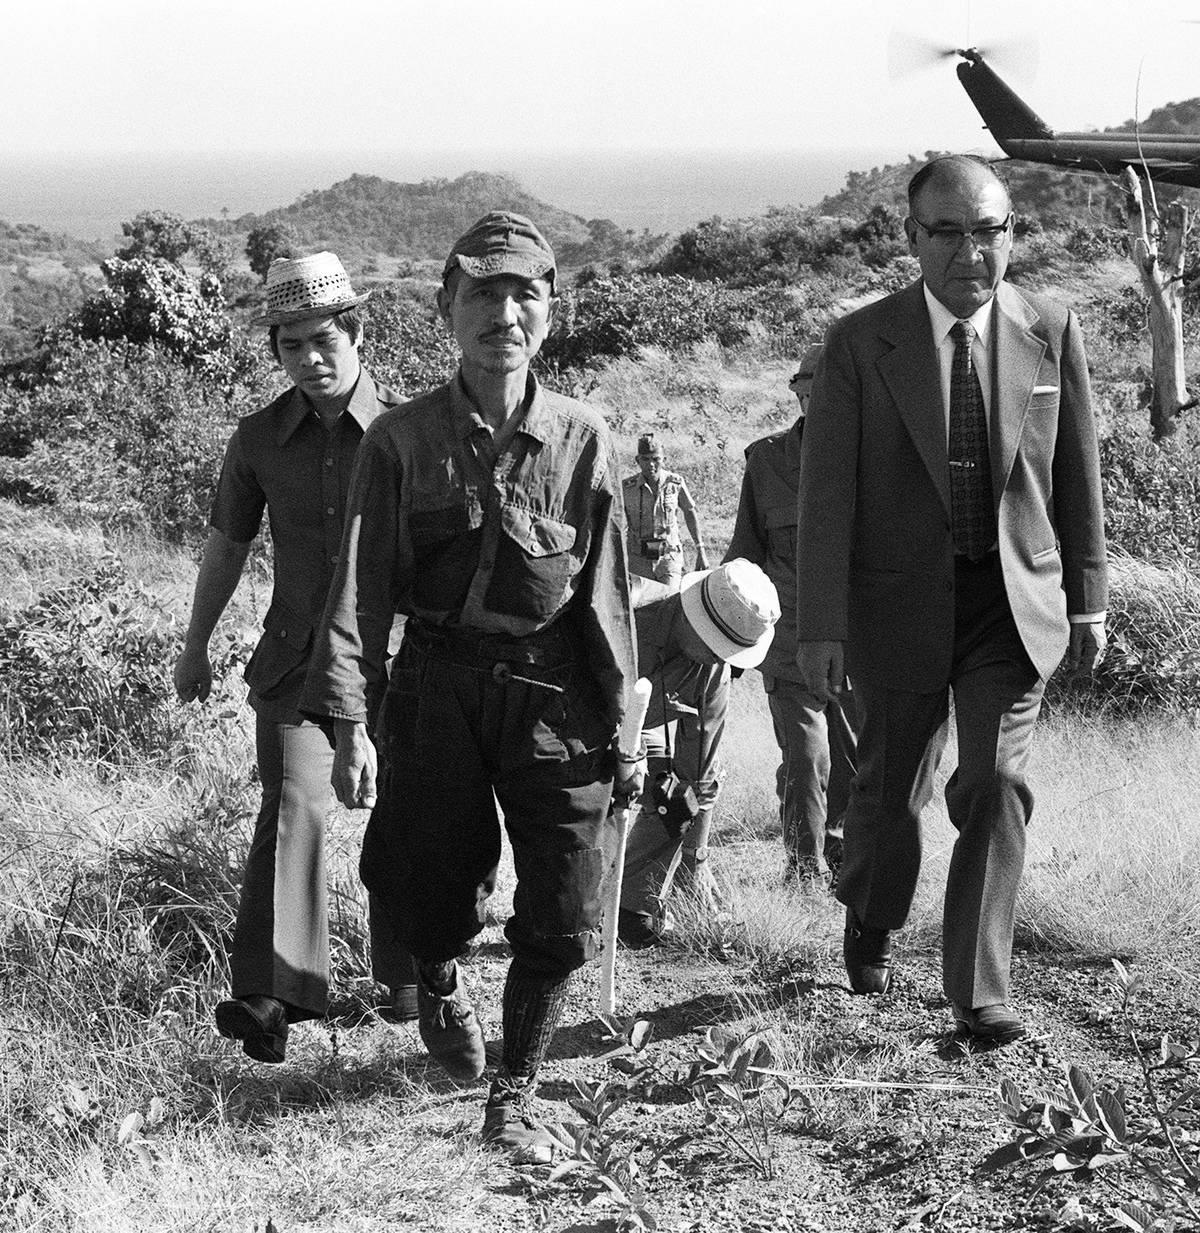 <p>Hiroo Onada was a Japanese intelligence officer and holdout who continued his service while hiding in the Philippines by using guerilla tactics and harassing locals.</p> <p>Onada refused to believe leaflets and the locals that said: "the war was over." In 1974, as per Onada's demand, his commanding officer had come to his hideout and relieved him of duty. </p>